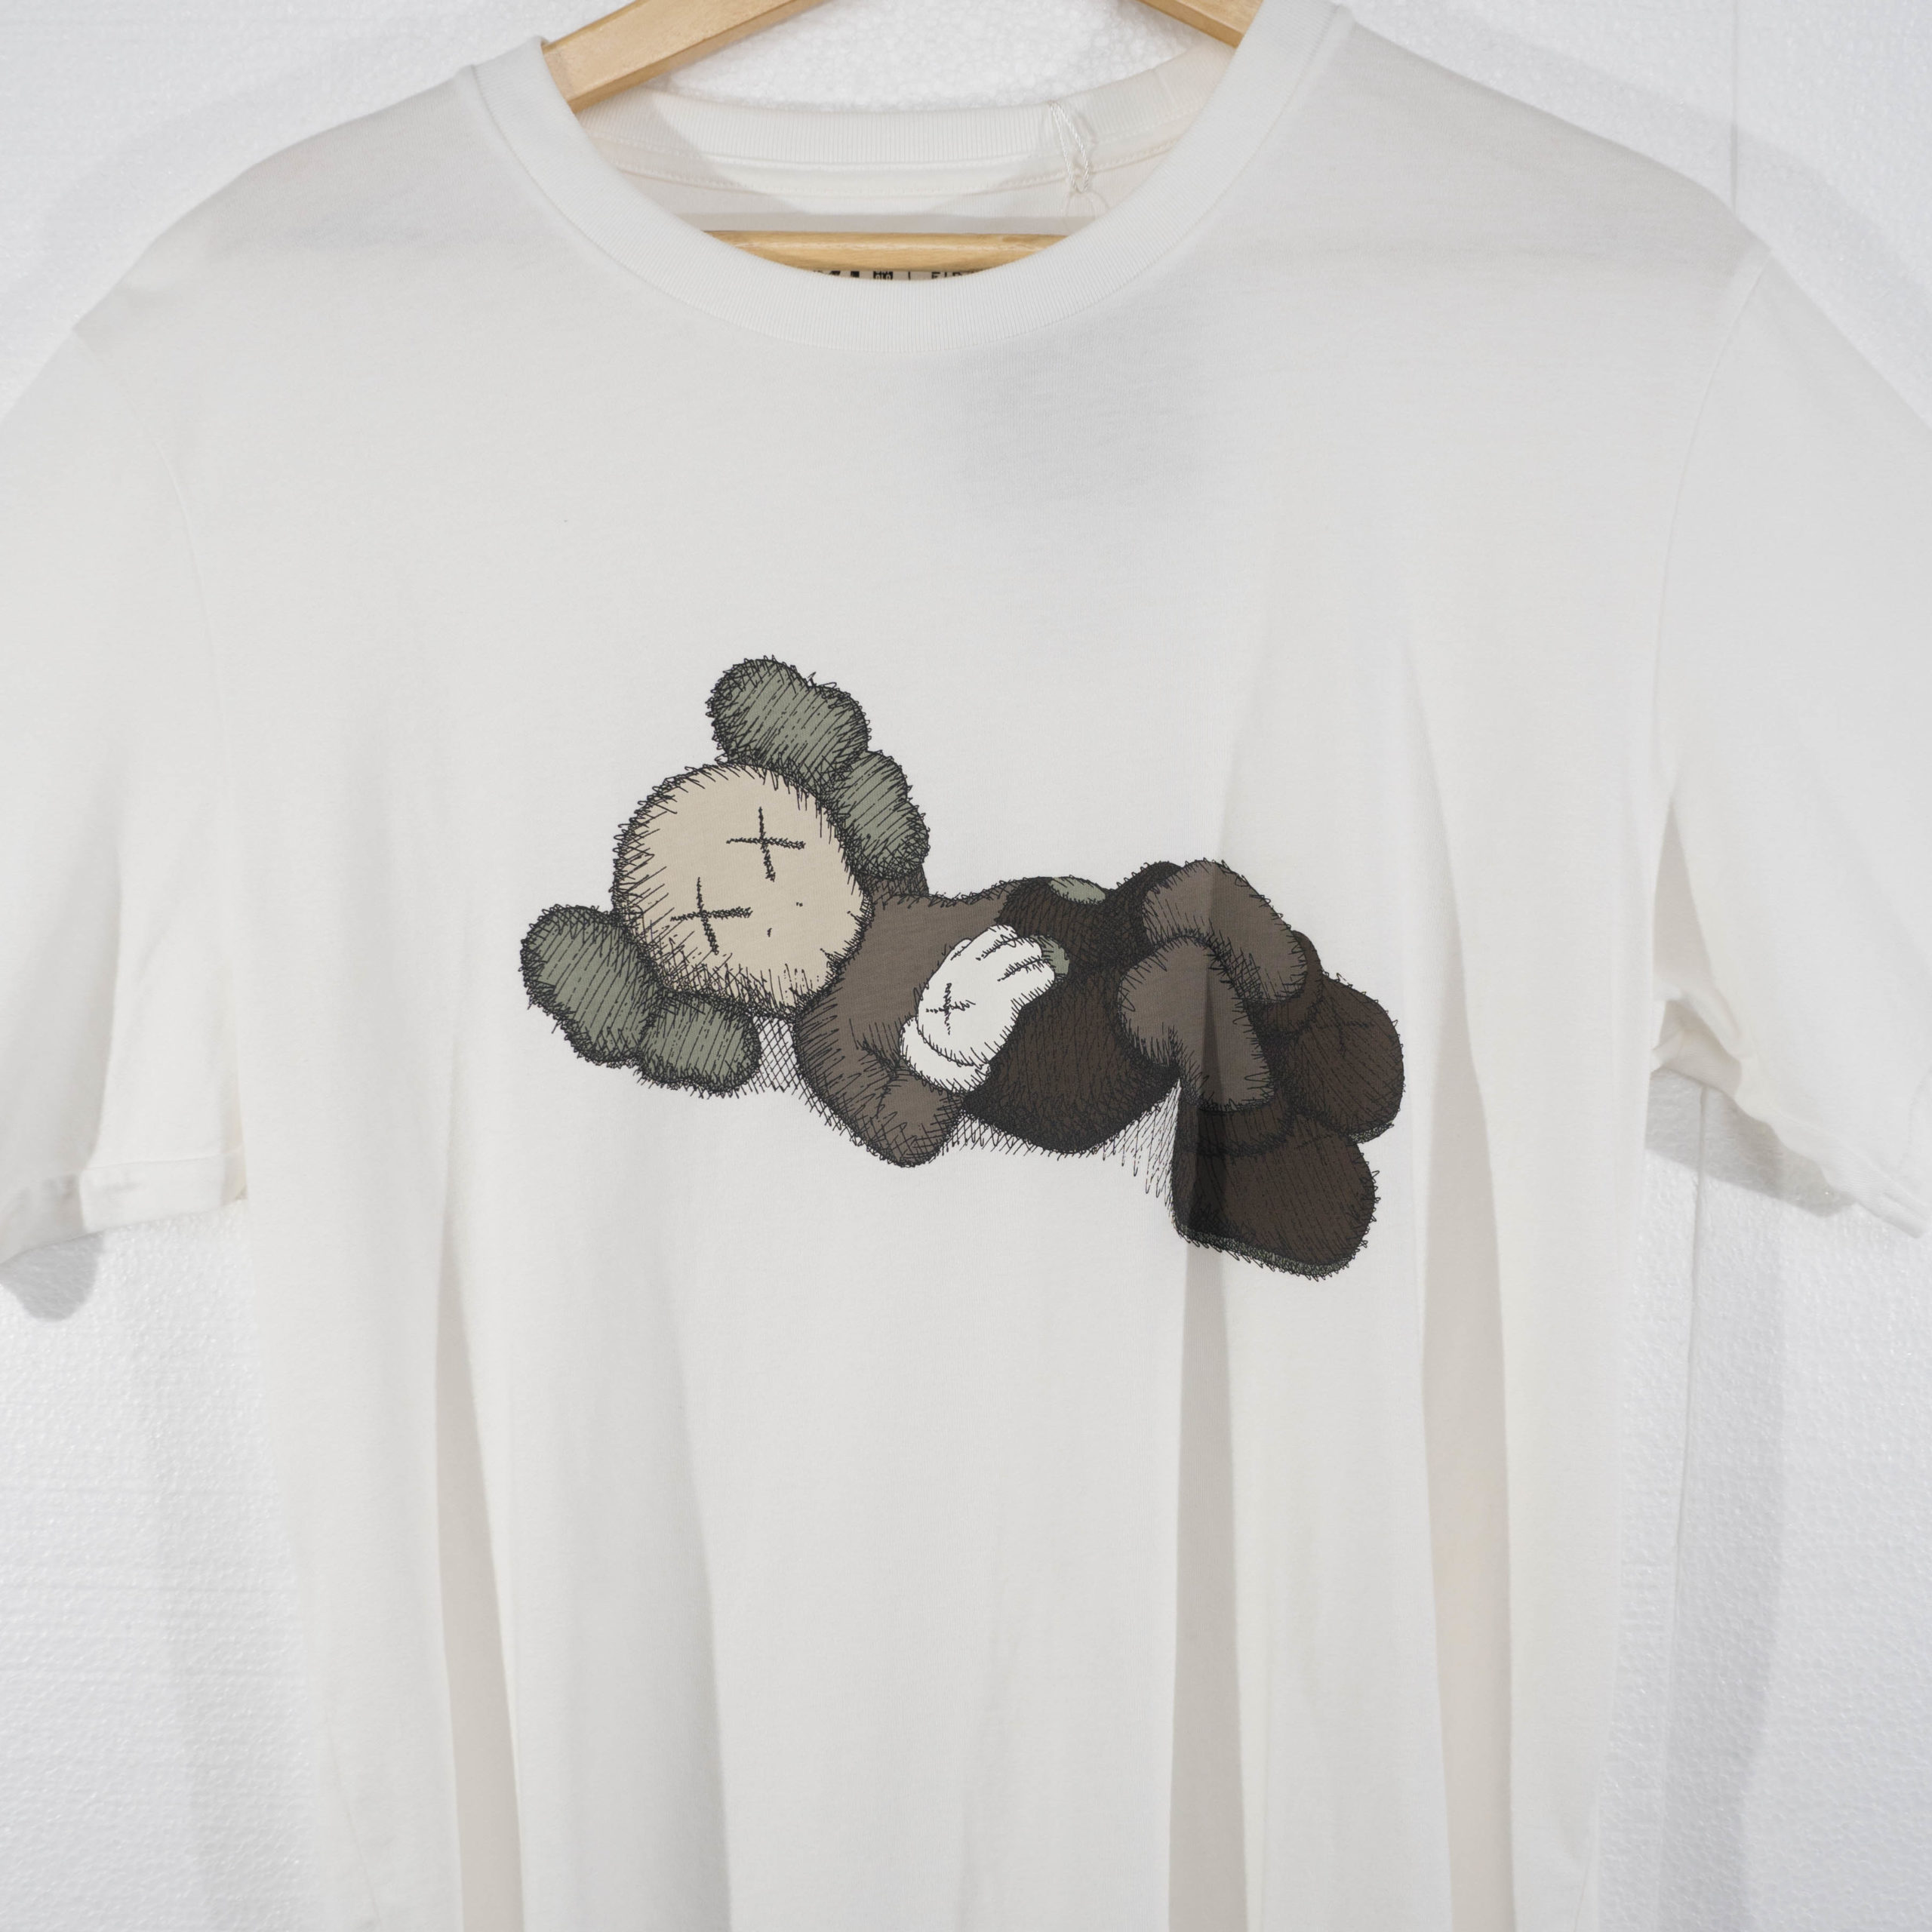 Uniqlo Australia  Are you ready for UT KAWS UT Creative Director and KAWS  devoted attention to all elements of the products from the design and  fabric to the inks  Facebook